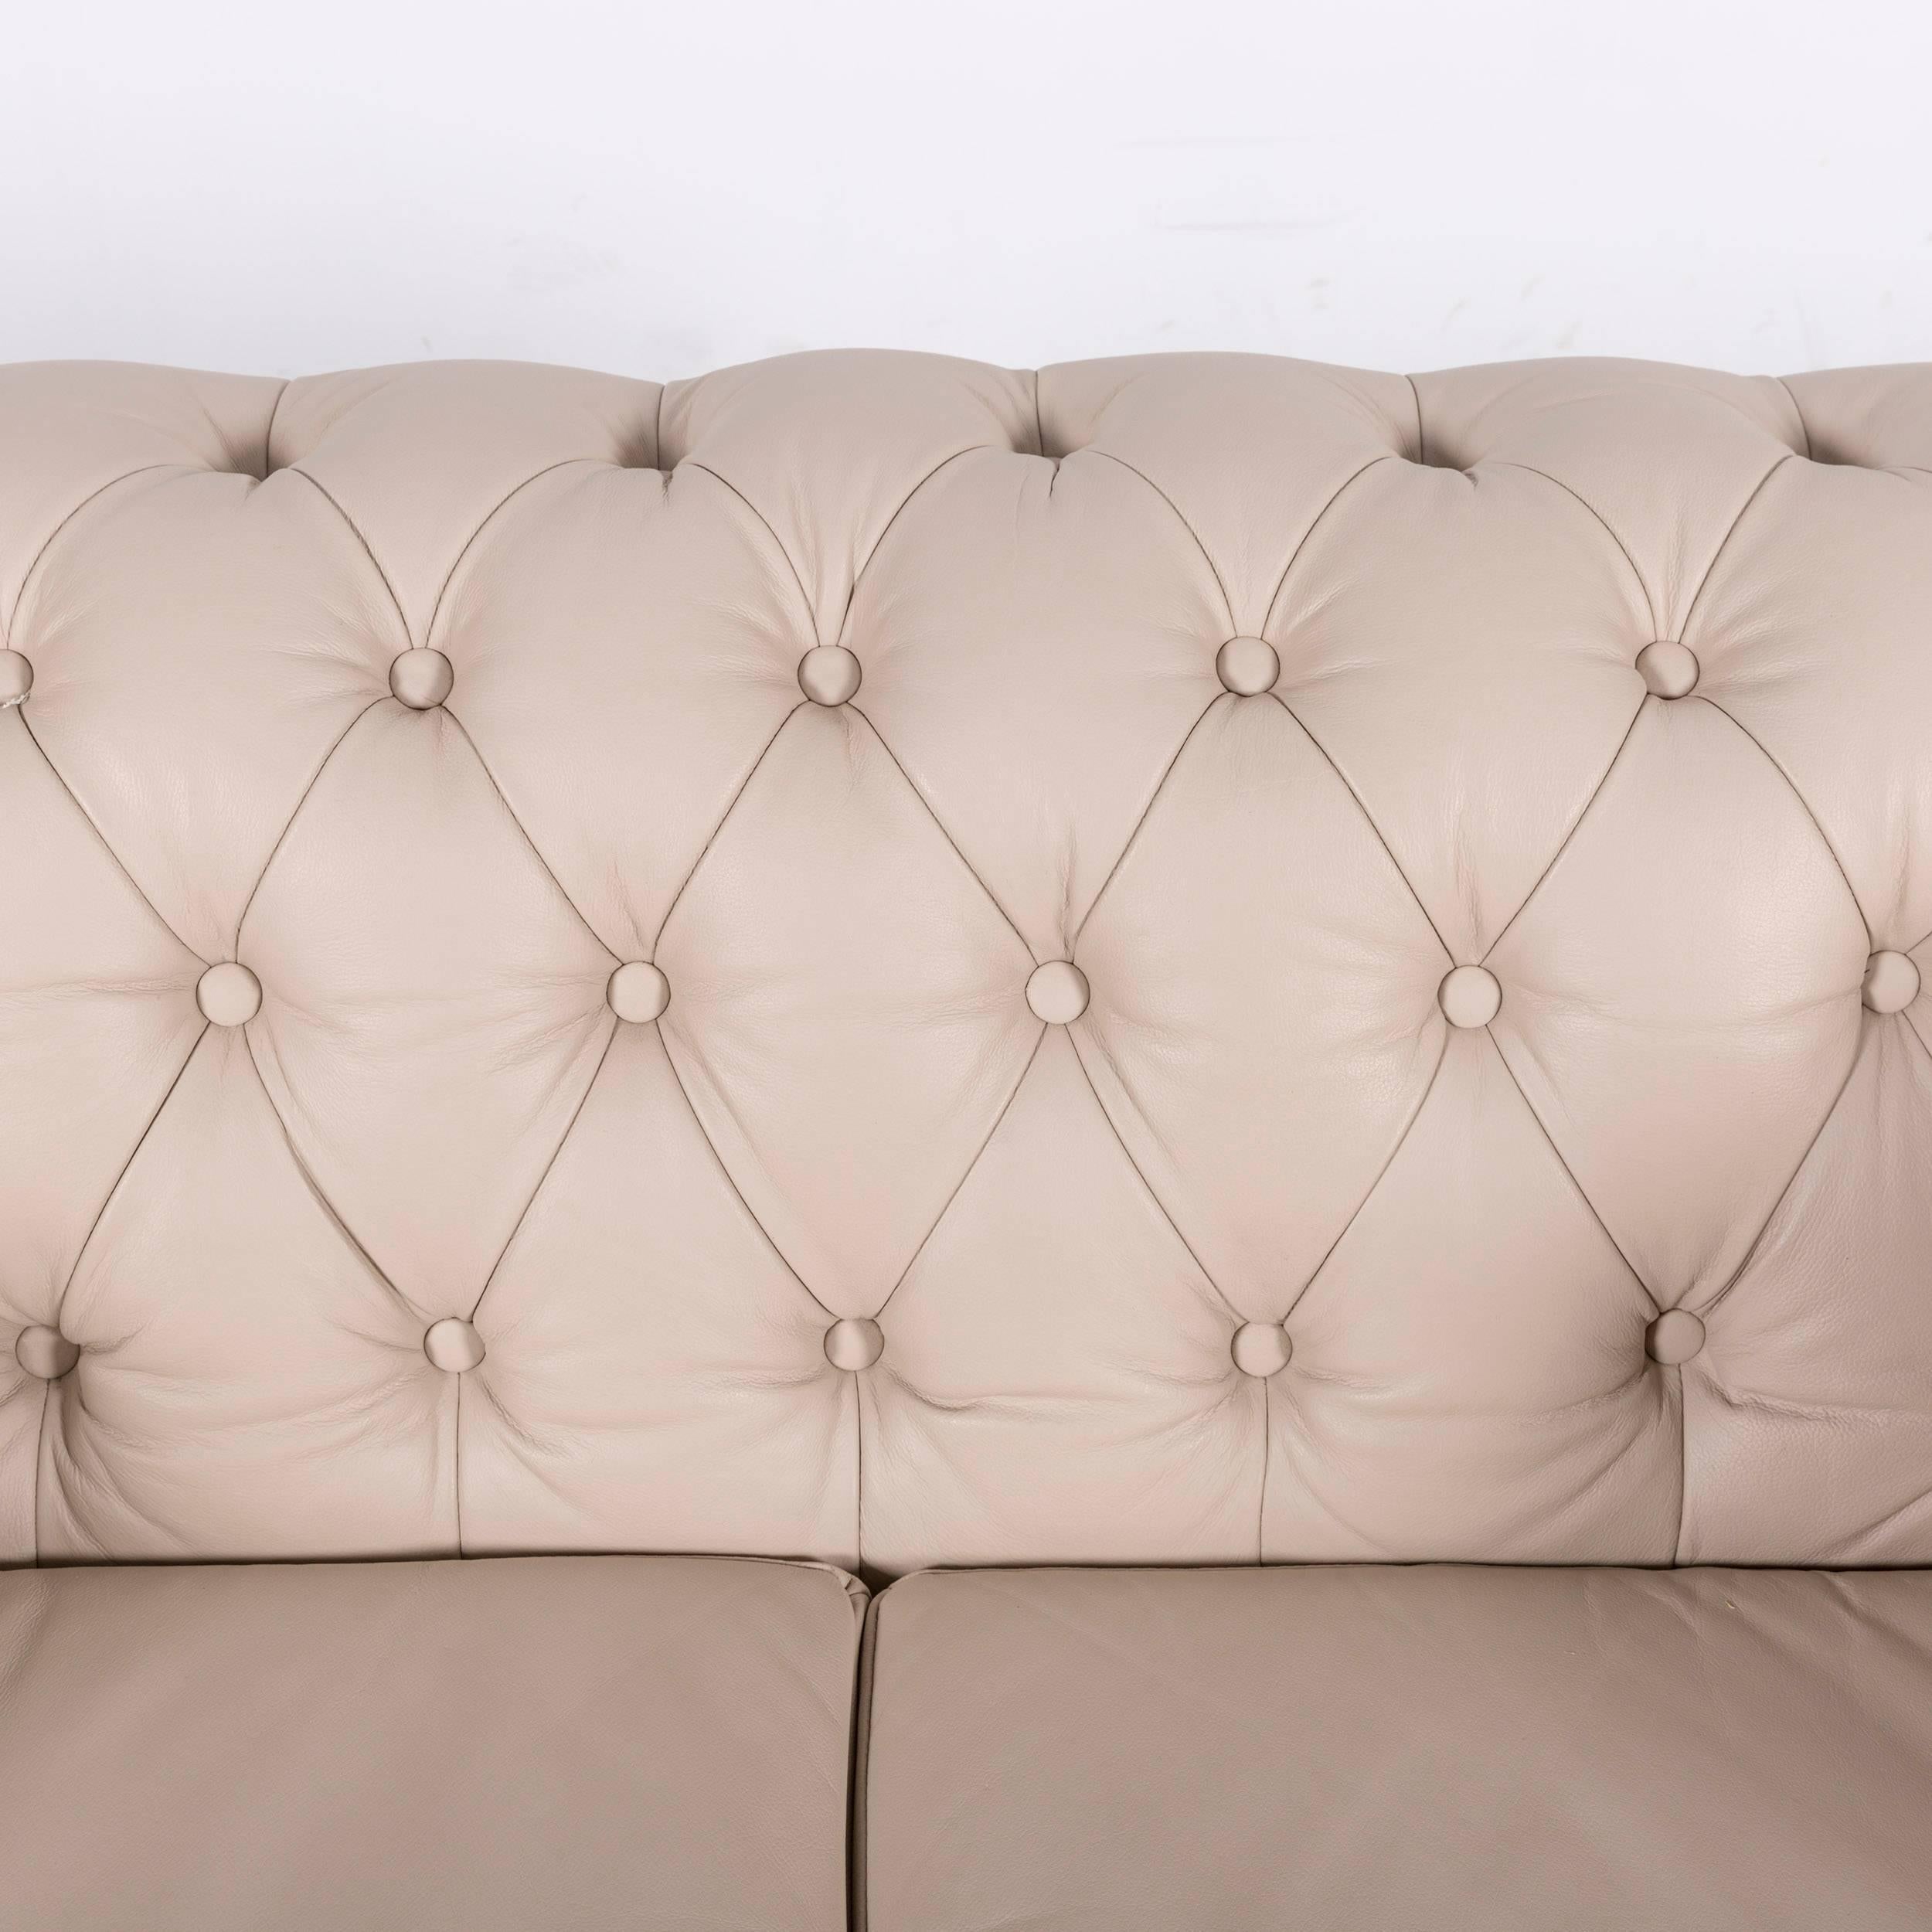 Chesterfield Leather Sofa Set Off-White, Three-Seat, and Two-Seat 6